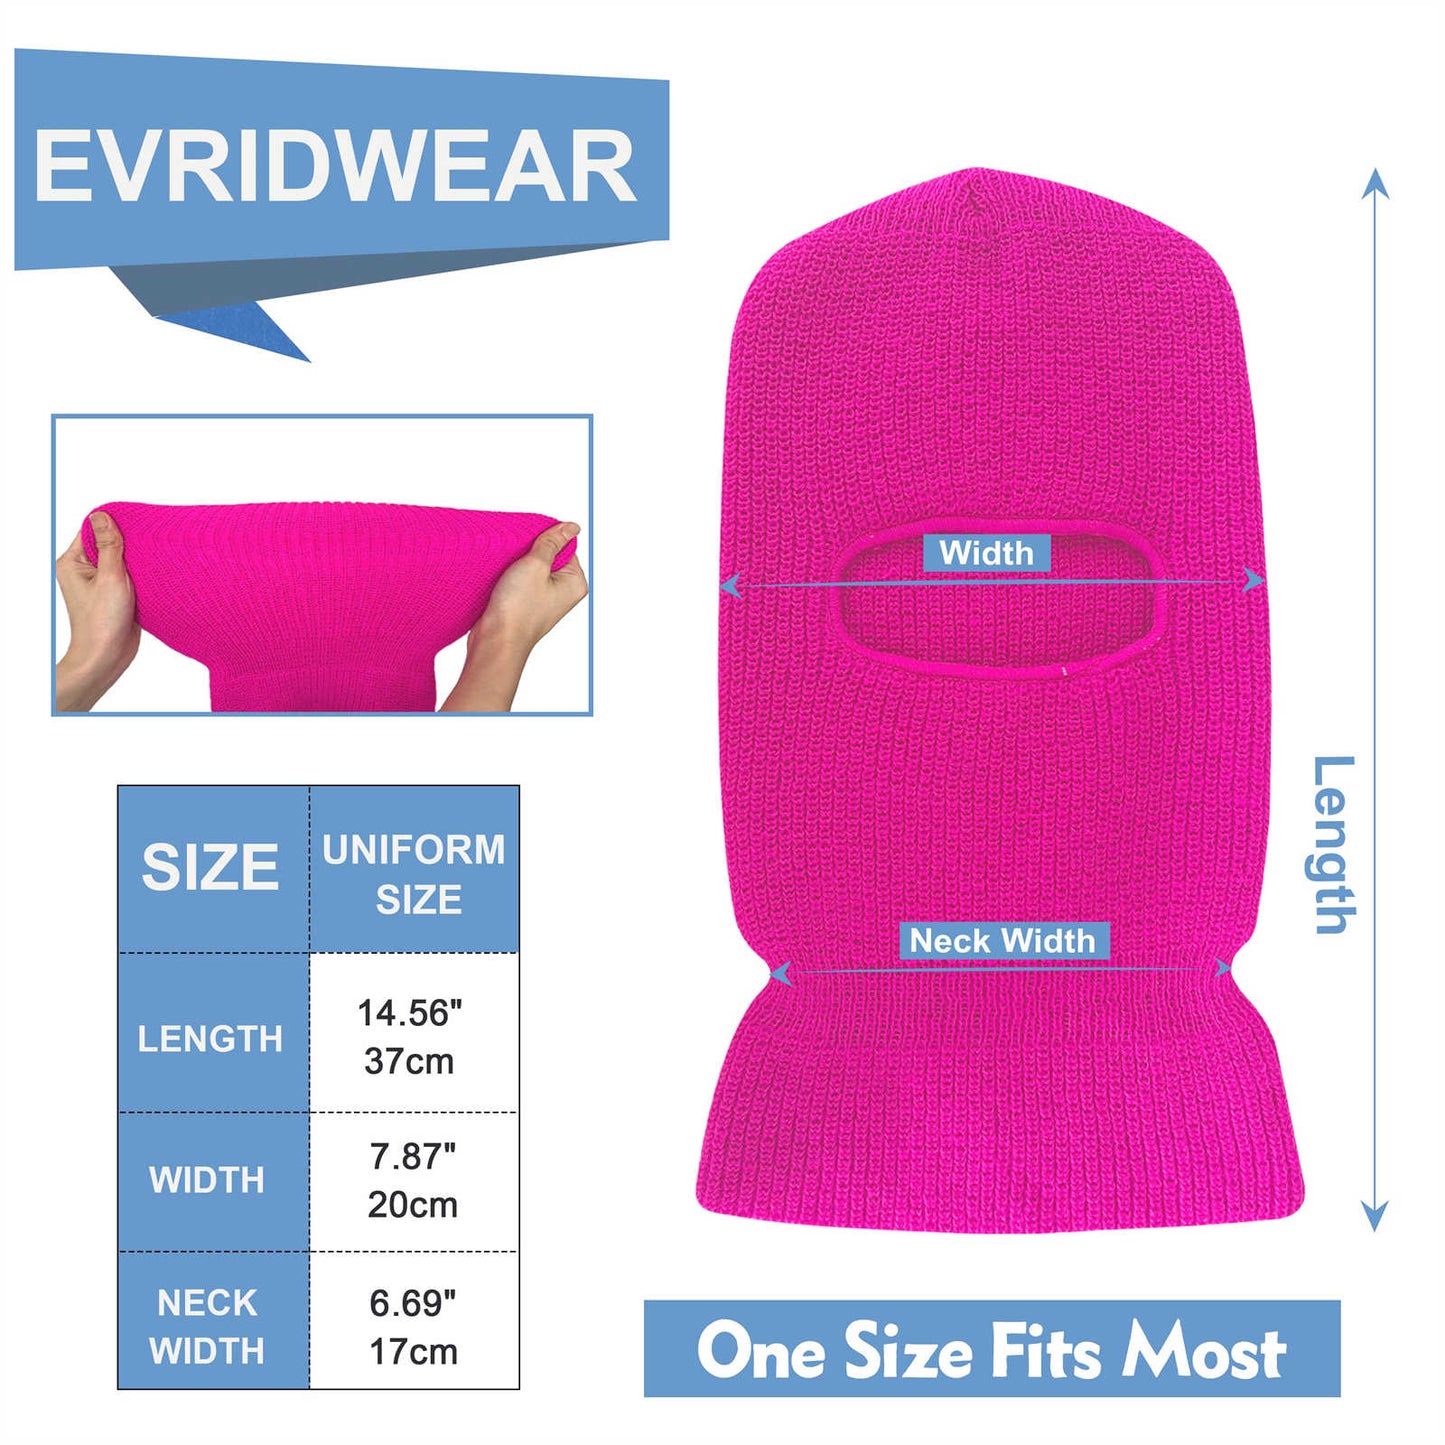 EvridWear 1 Pack 3M Thinsulate Balaclava Face Mask, Thermal Winter Ski Mask for Cold Weather, Men Women (Pink)